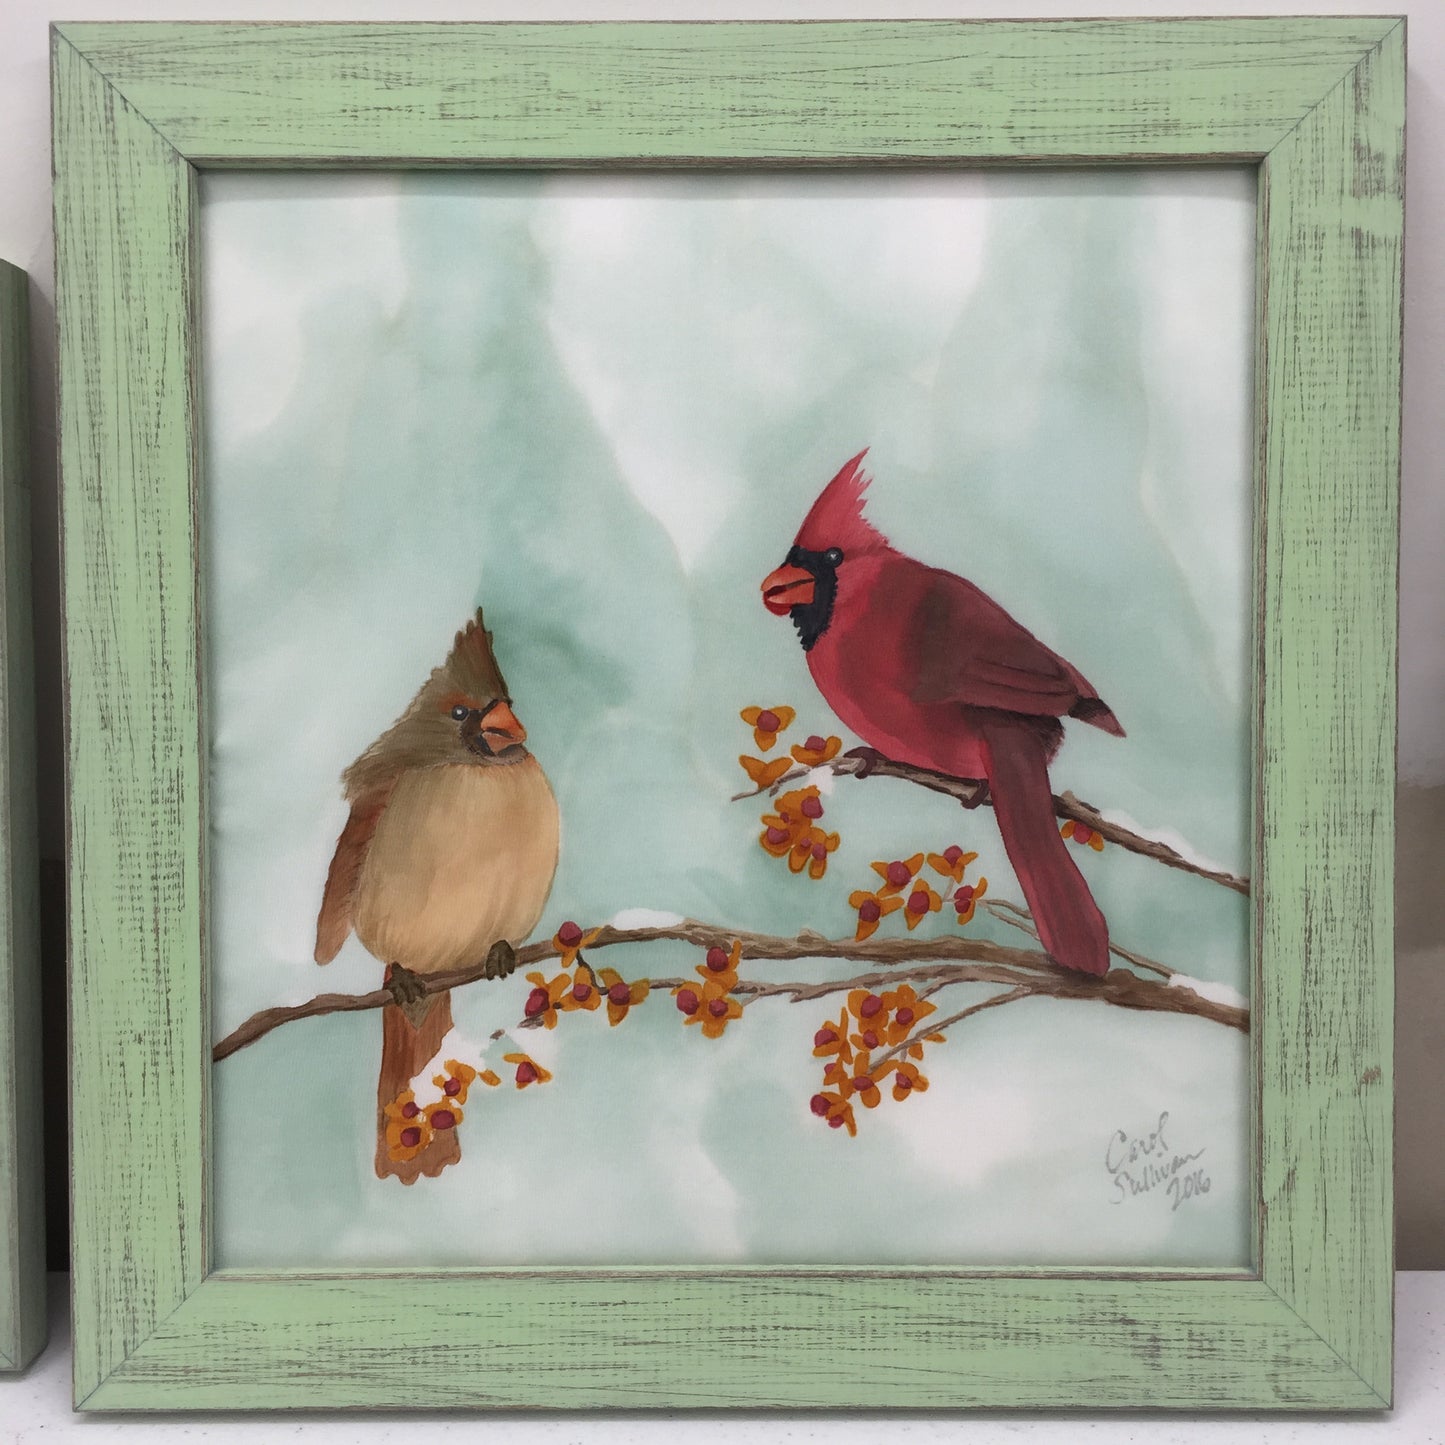 "The Courtship" - Three Paintings on Silk - SOLD